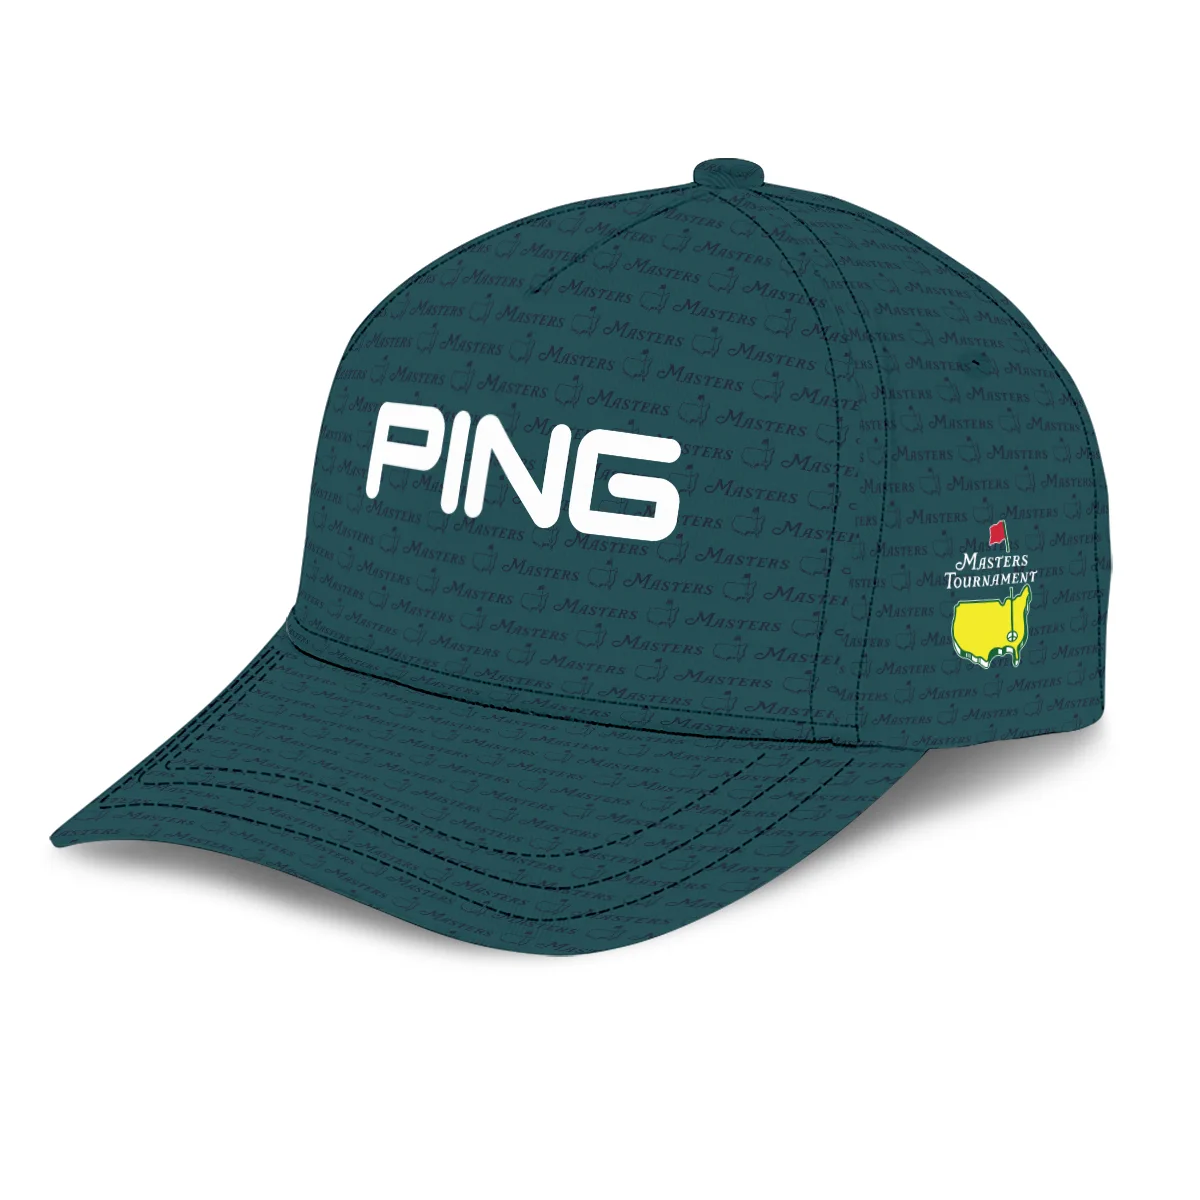 Golf Pattern White Mix Green V2 Titleist Masters Tournament Style Classic Golf All over Print Cap